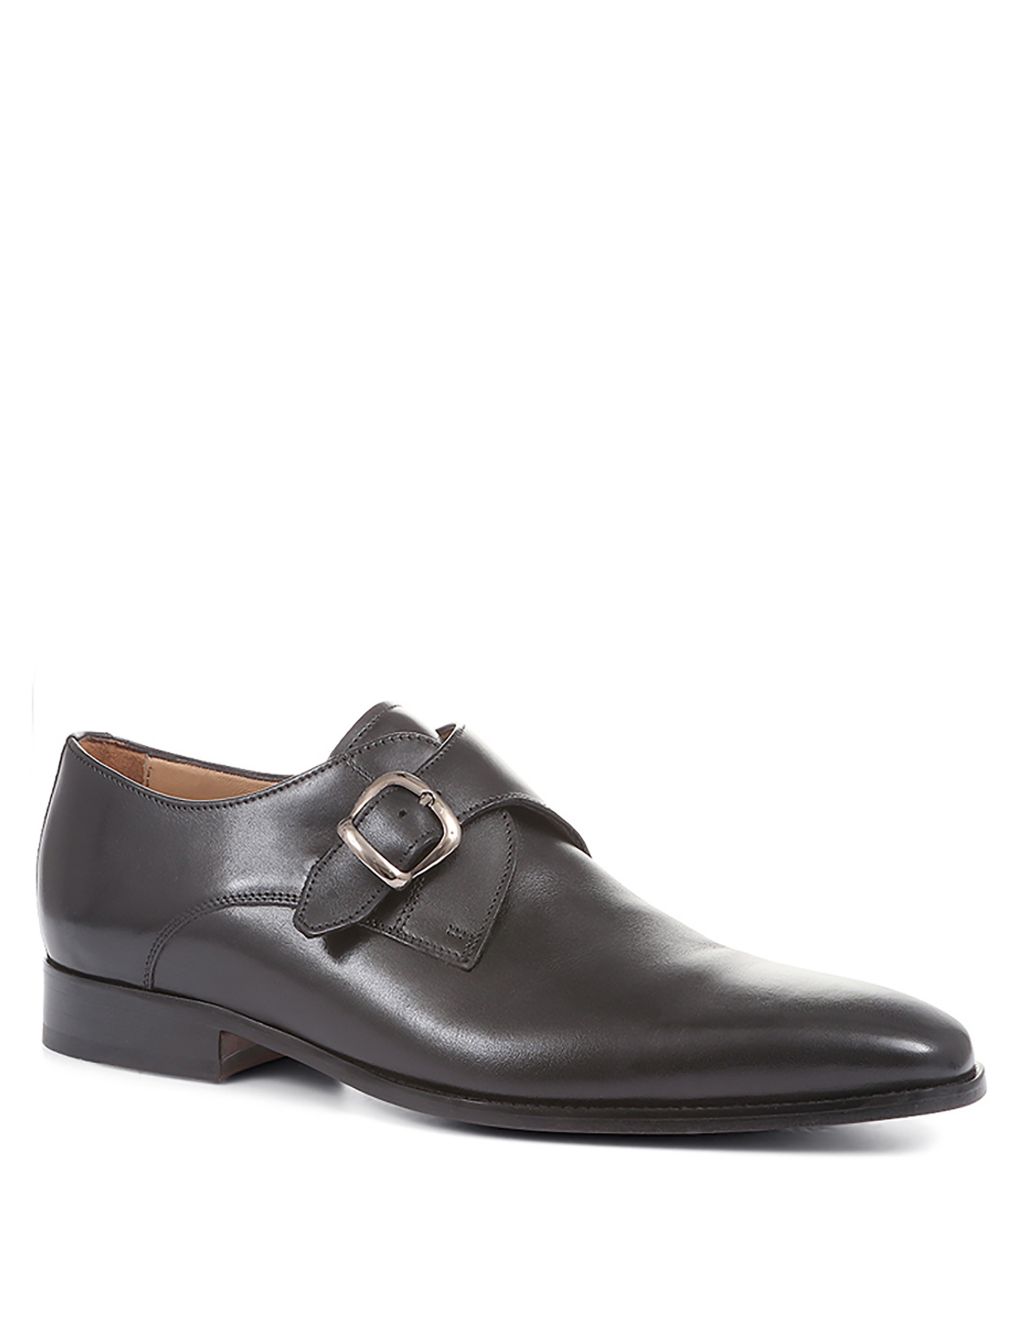 Leather Monk Strap Shoes image 2